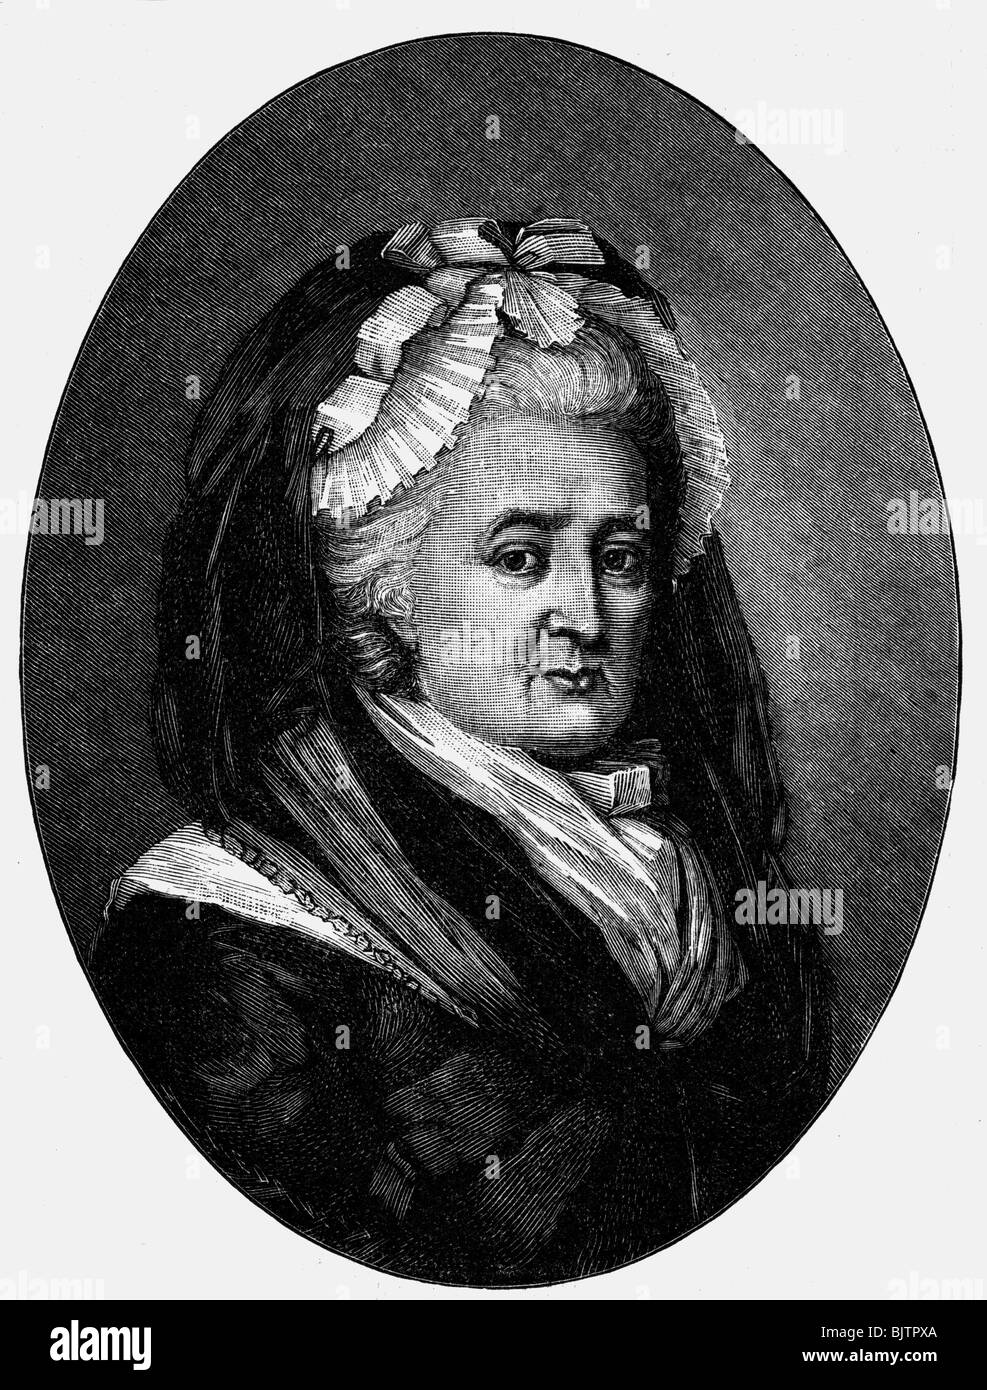 Elisabeth Christine, 8.11.1715 - 13.1.1797, Queen Consort of Prussia 31.5.1740 - 17.8.1786, portrait, as widow, circa 1790, wood engraving, 19th century, , Stock Photo